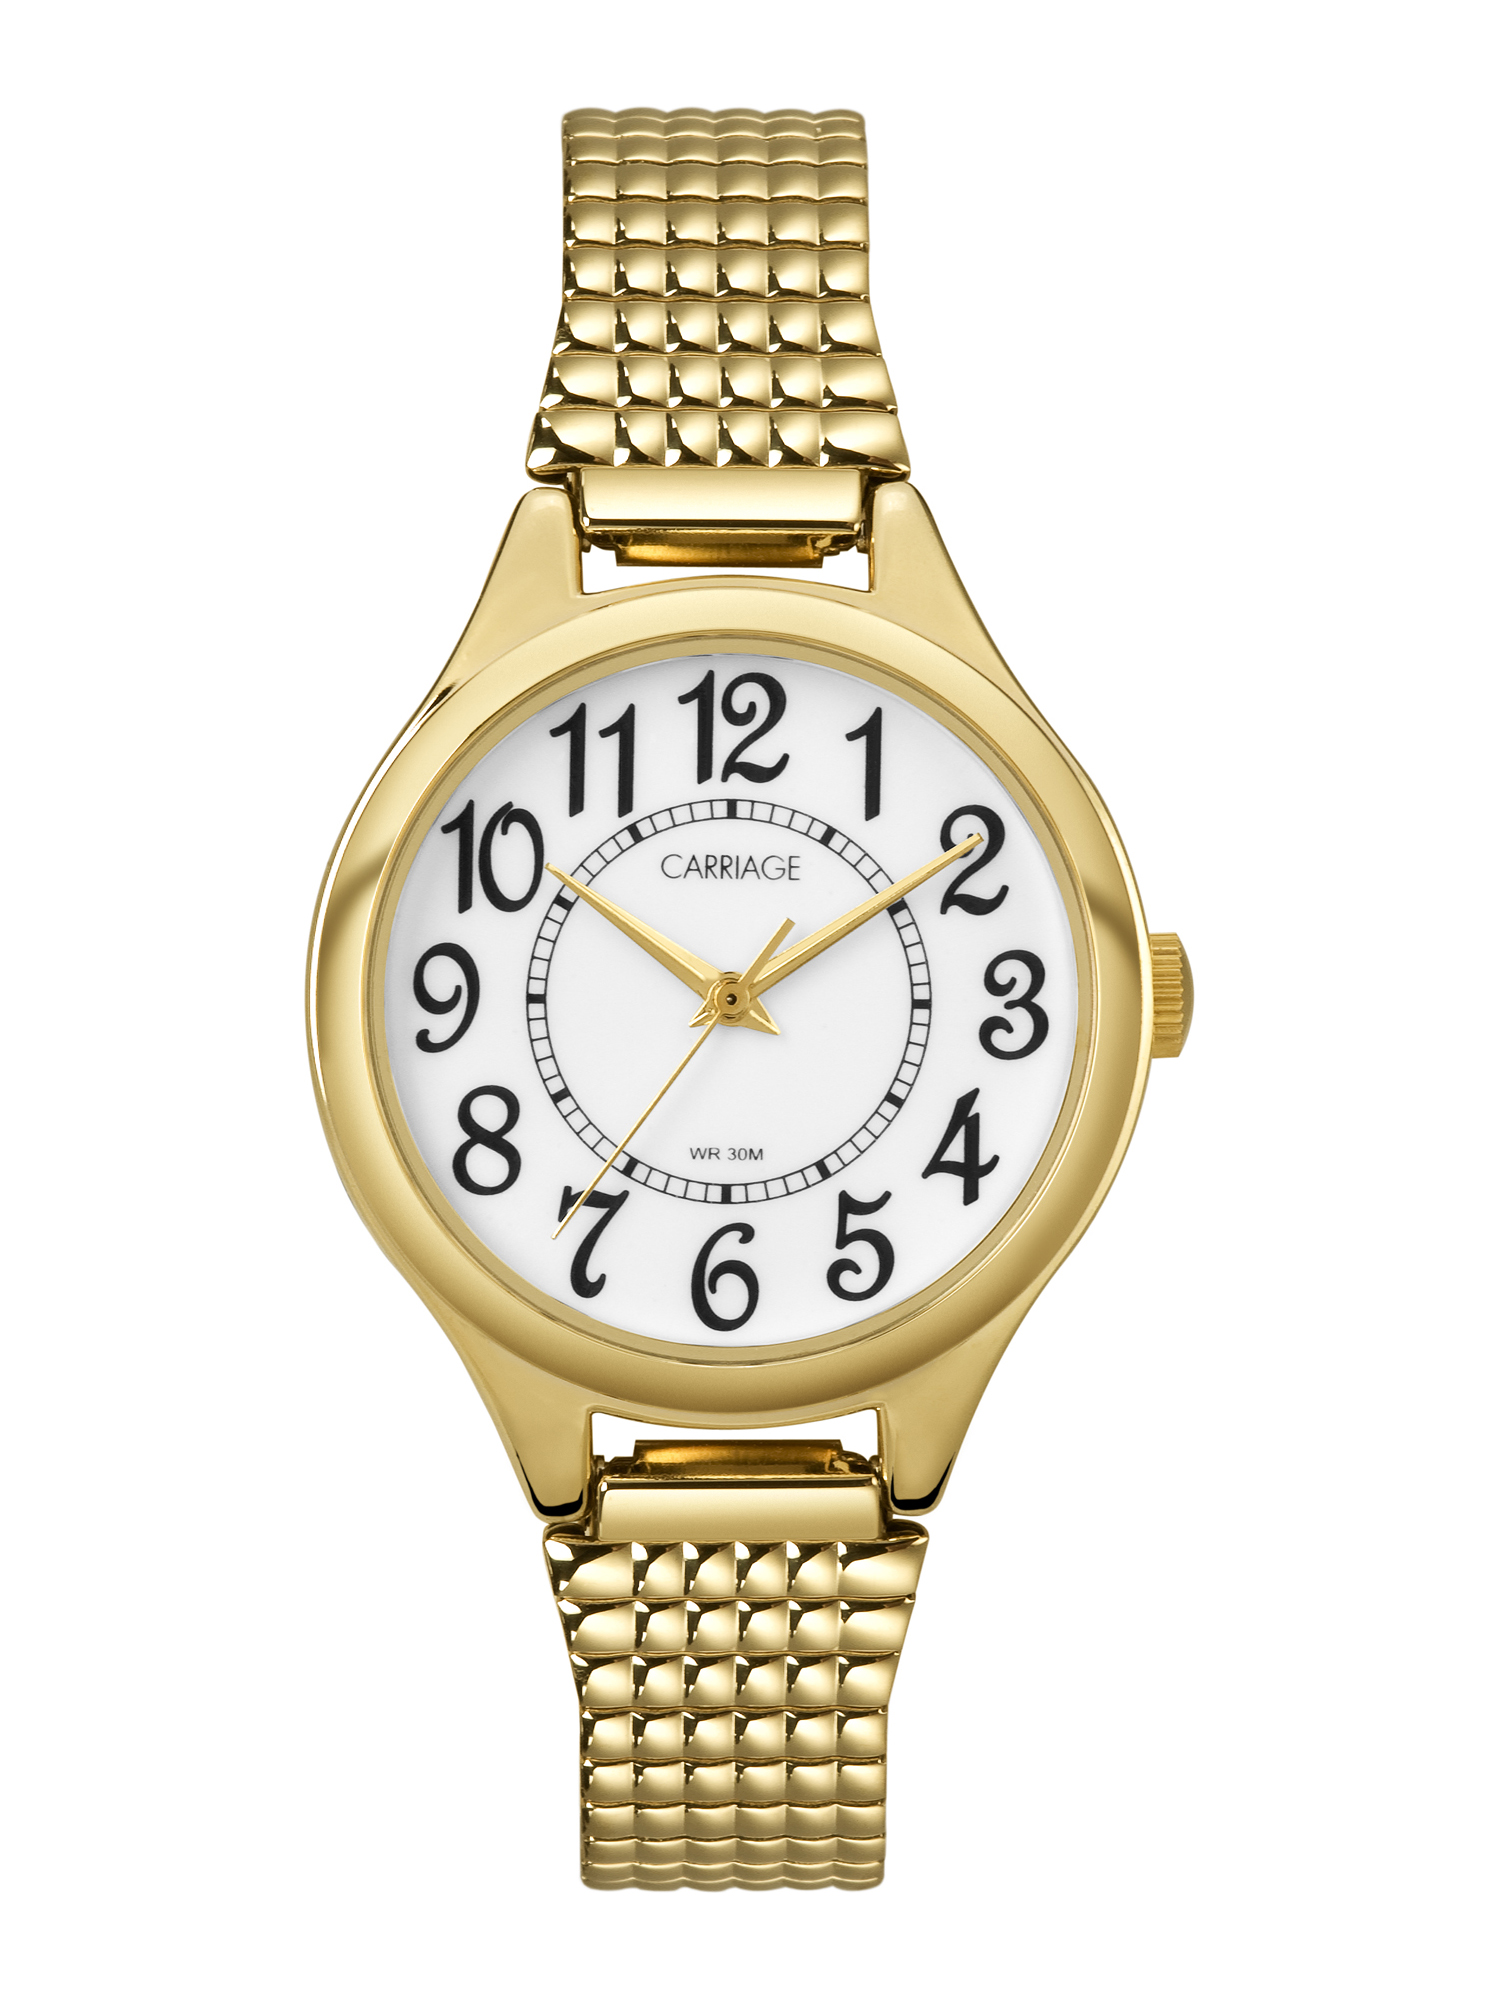 Carriage Women's Carolyn Watch, Gold-Tone Stainless Steel Expansion Band - image 1 of 3